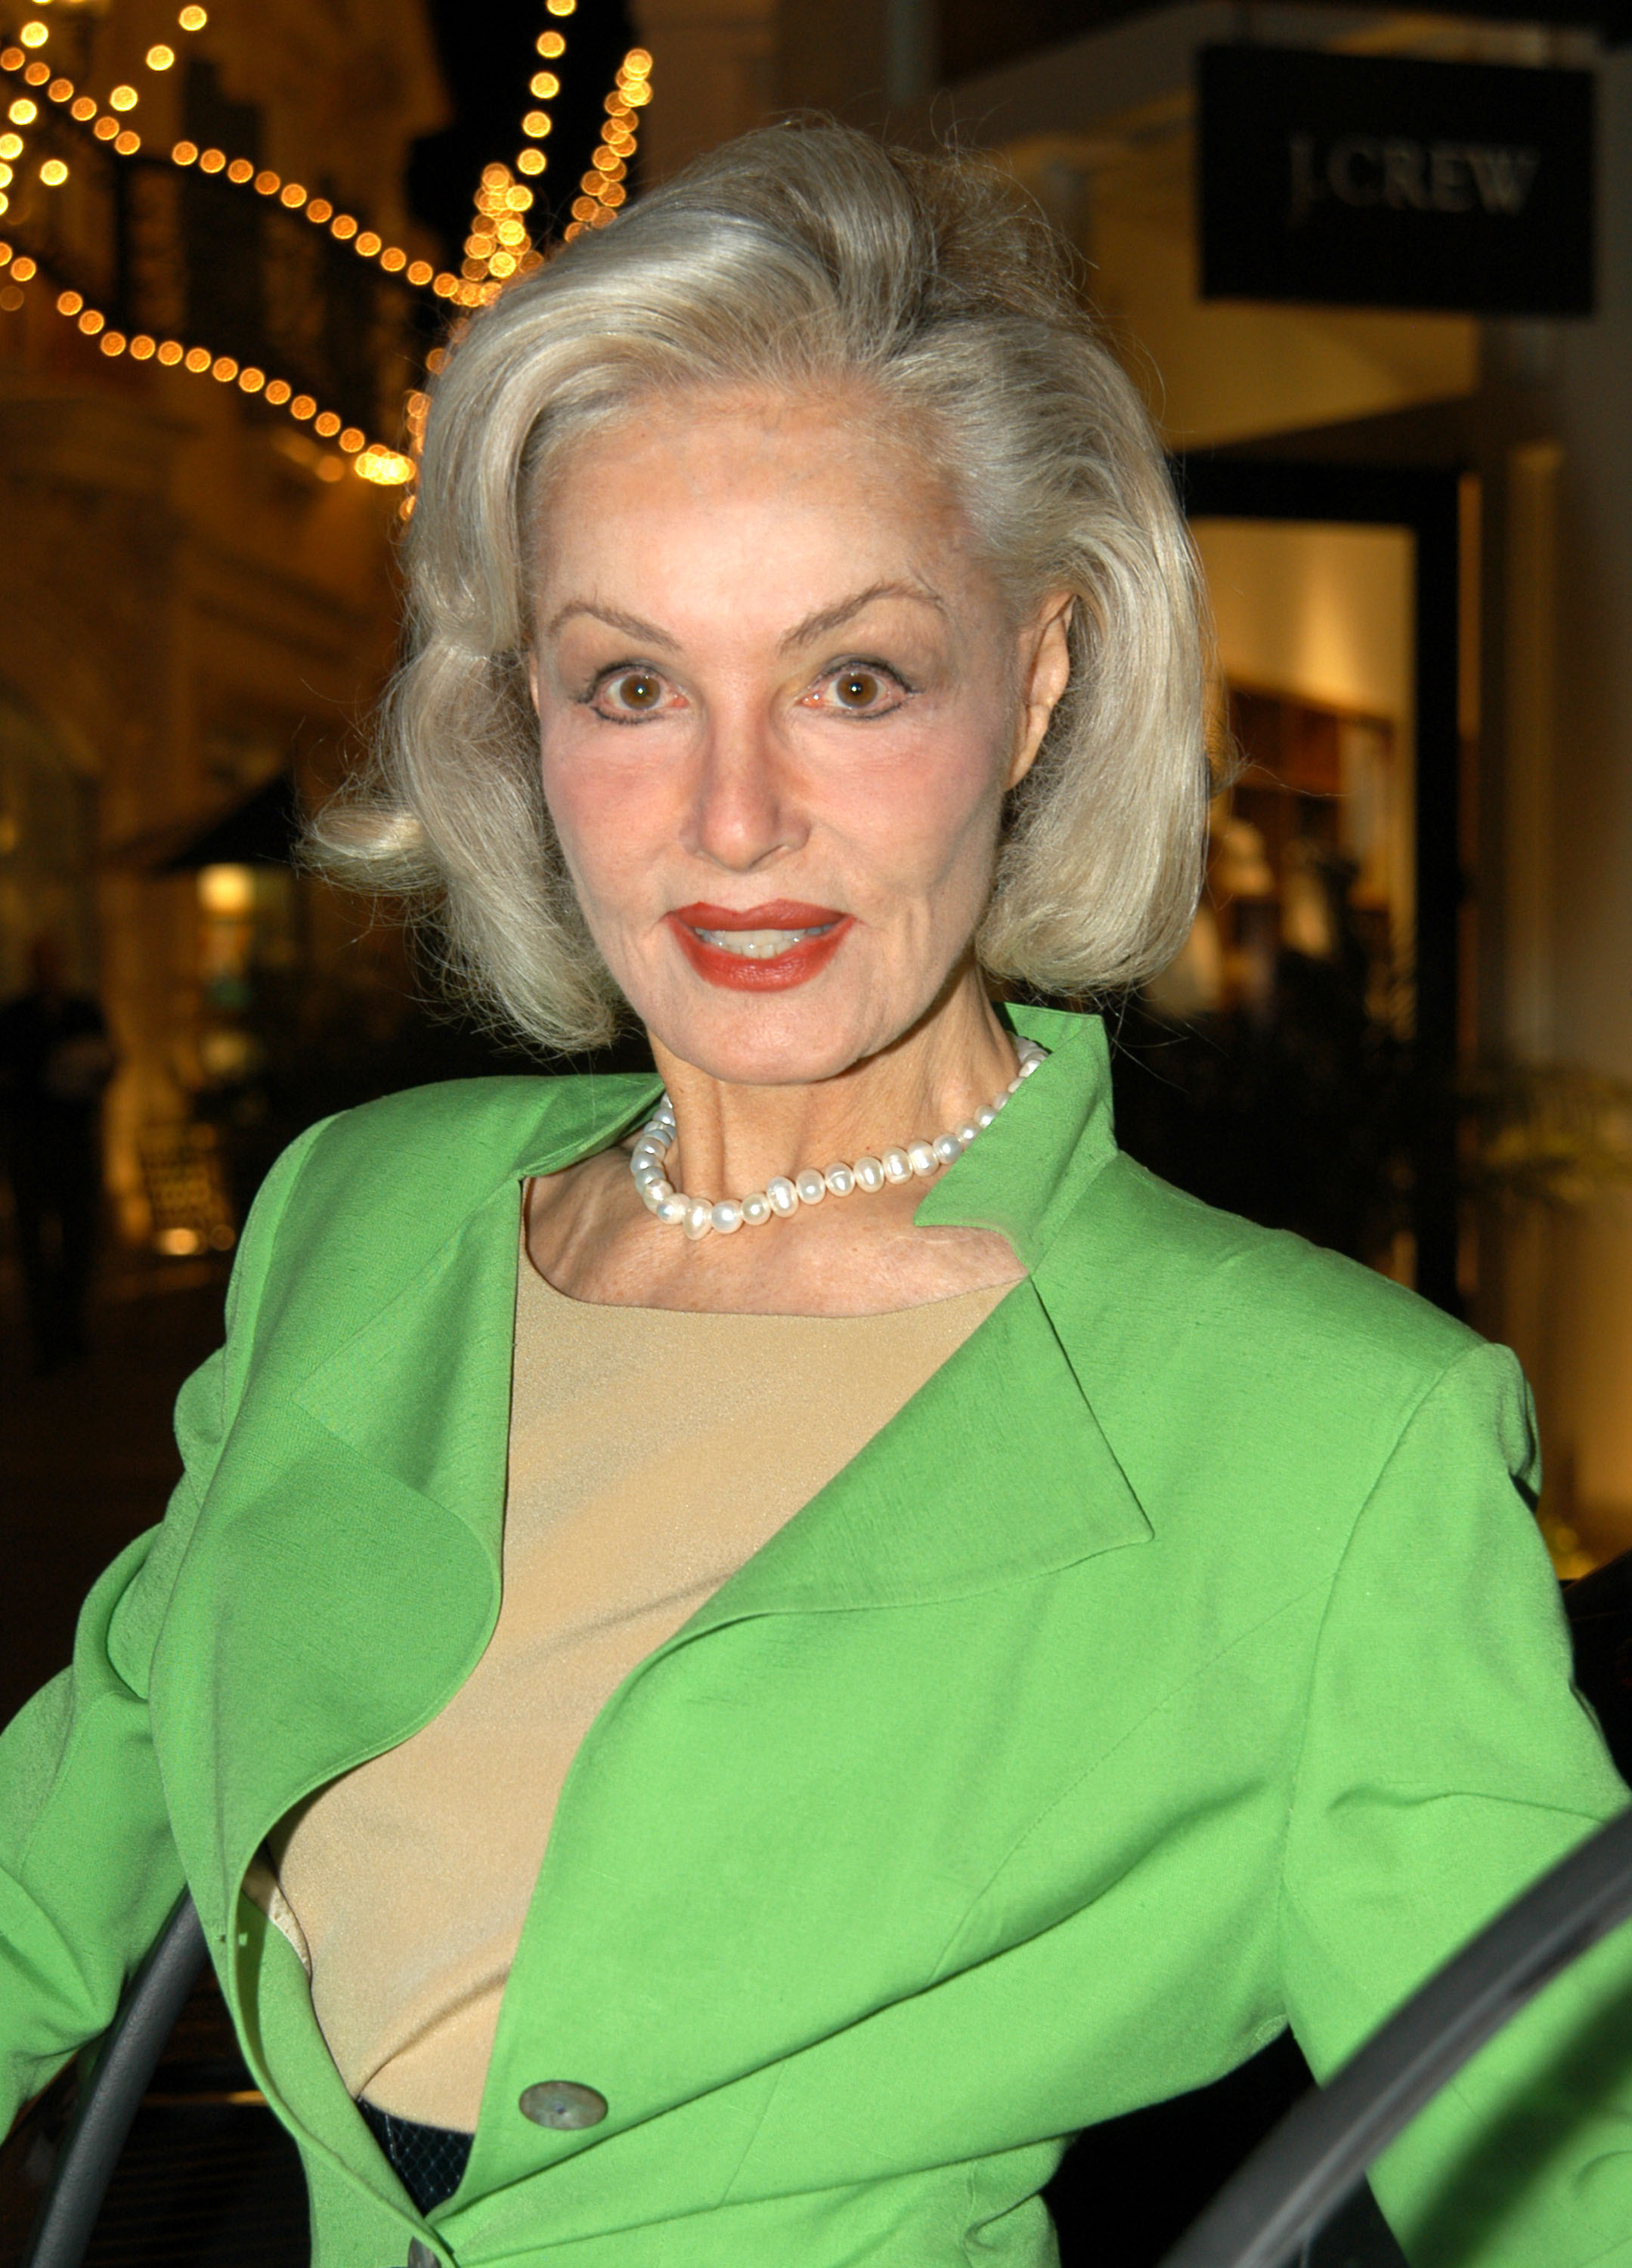 Julie Newmar's picture taken on January 30, 2003 1984 | Source: Getty Images